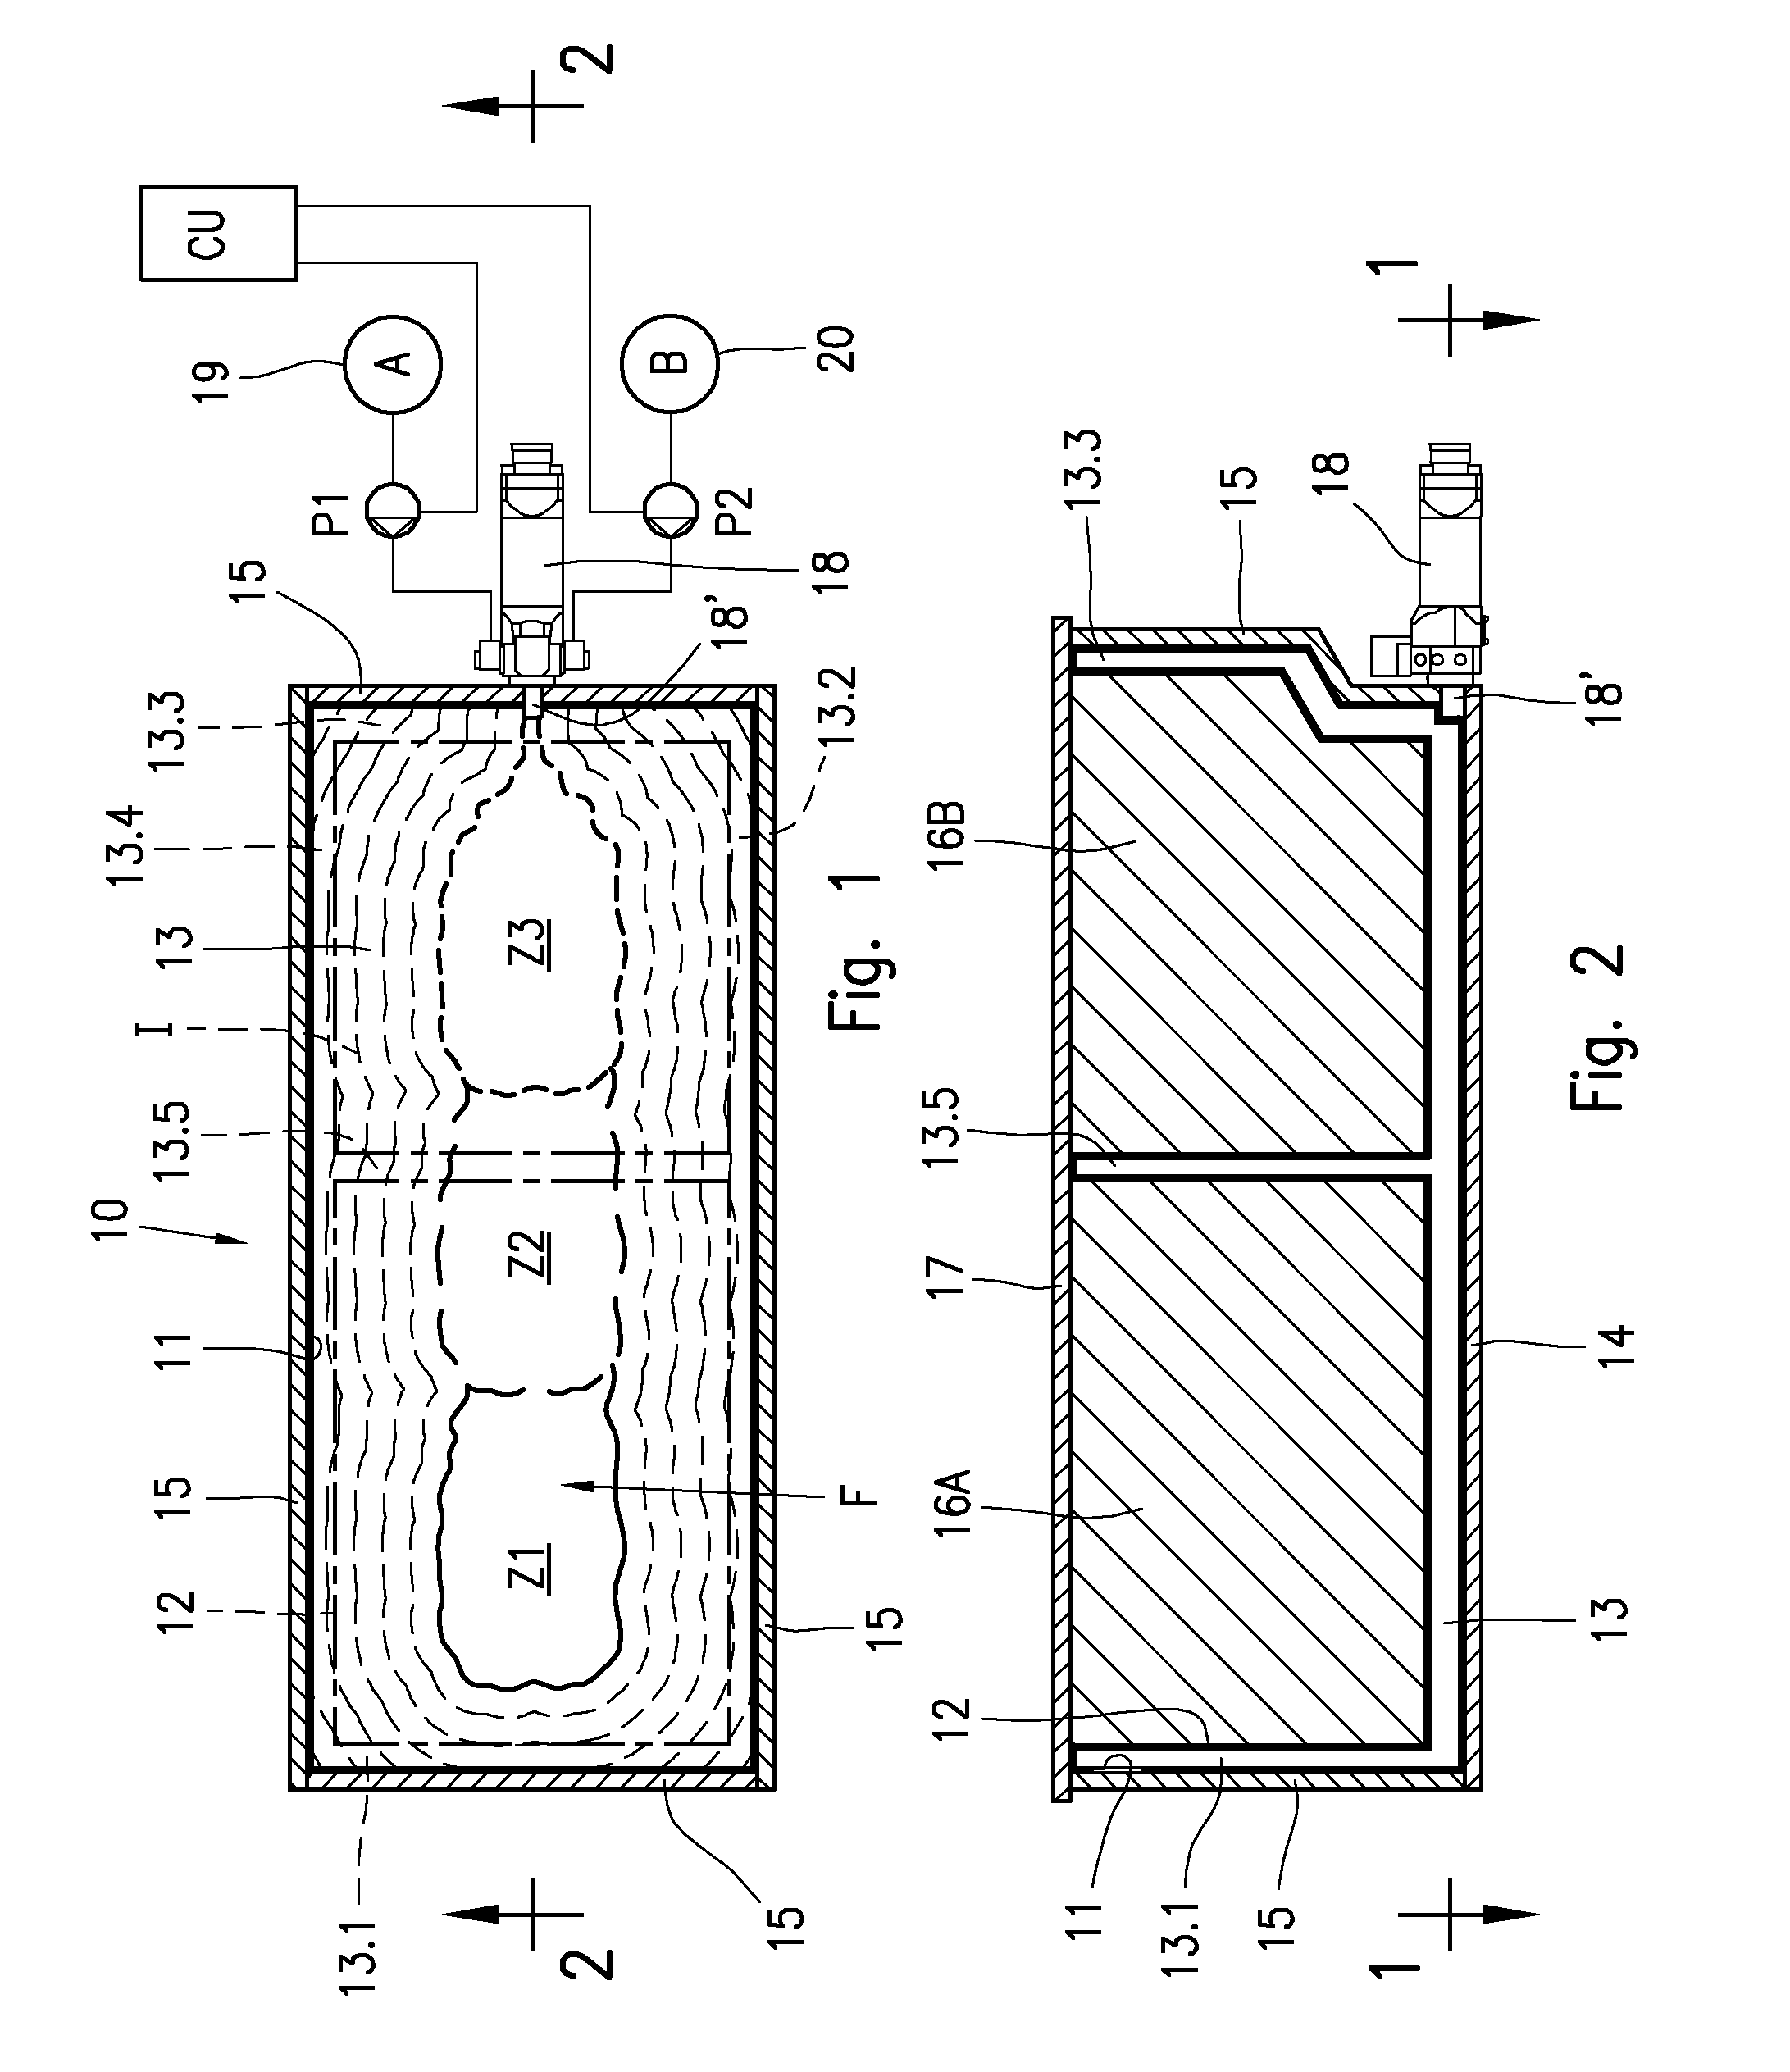 Method and apparatus for feeding a polyurethane mixture into hollow bodies